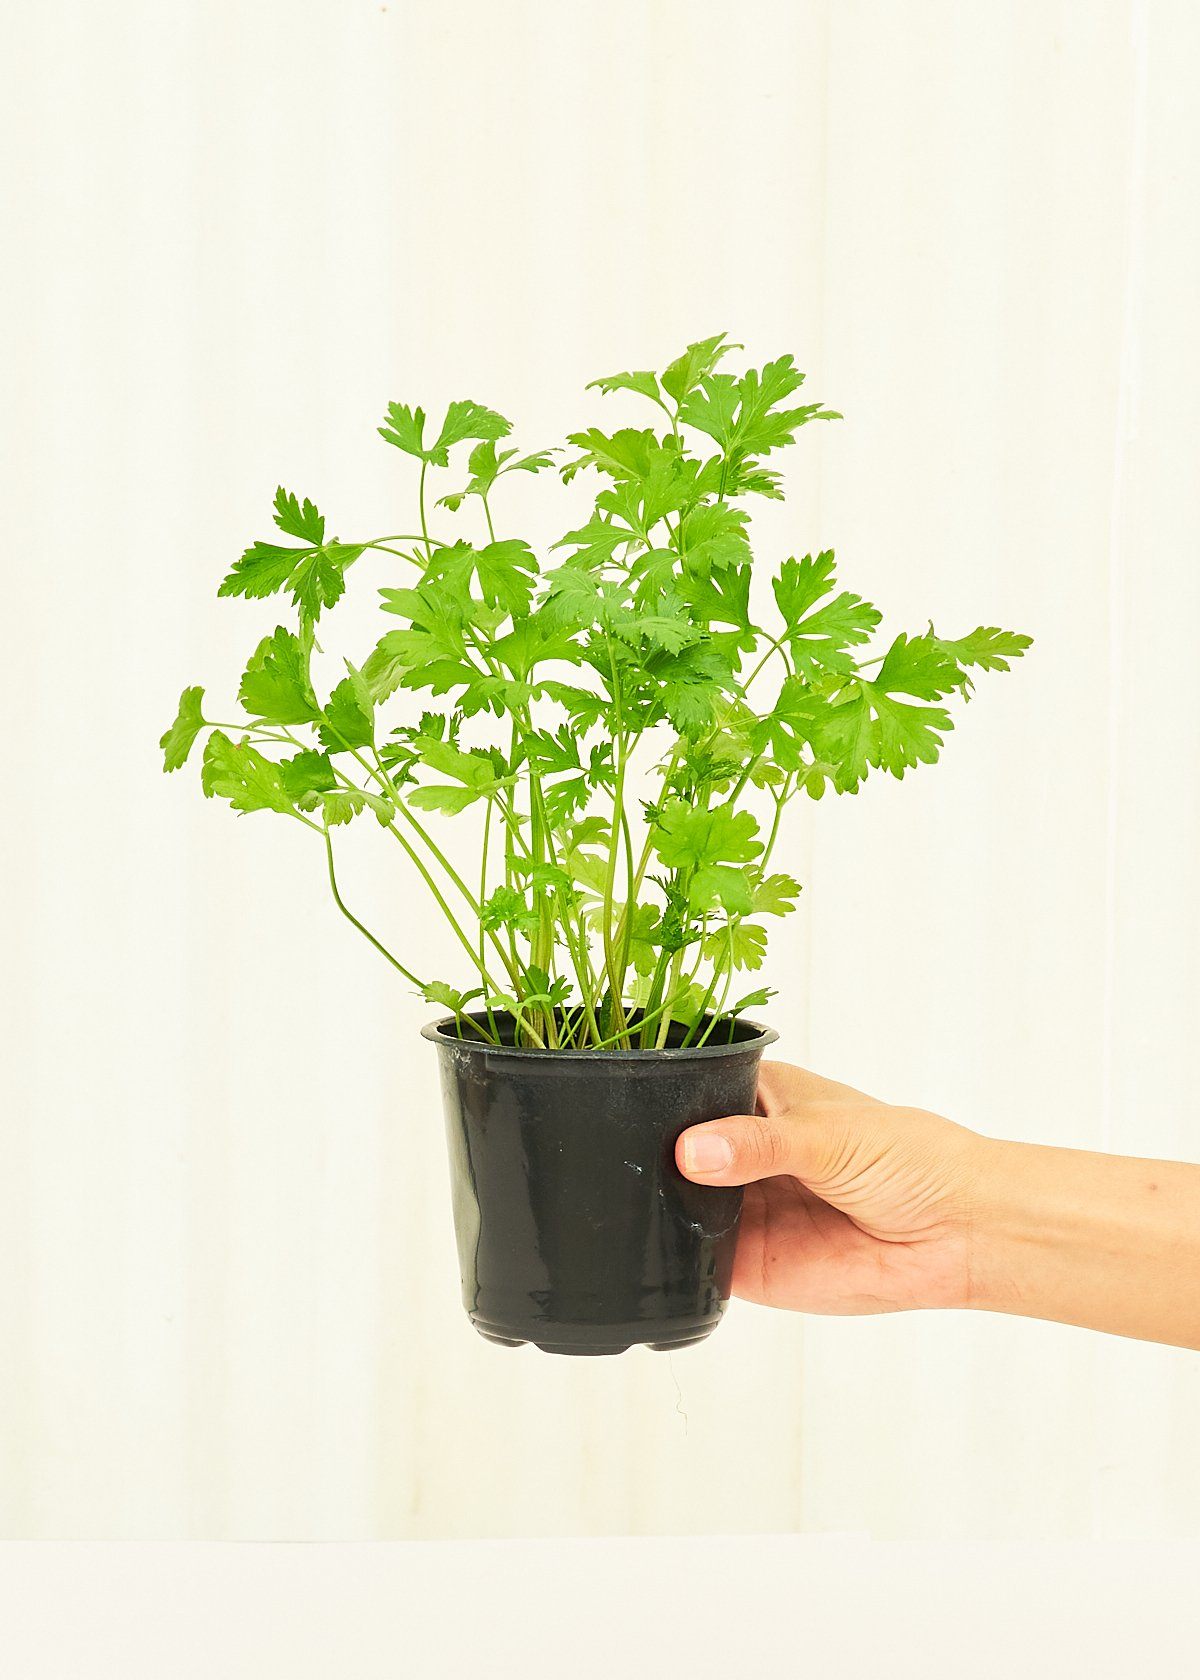 Parsley in a 4" pot.